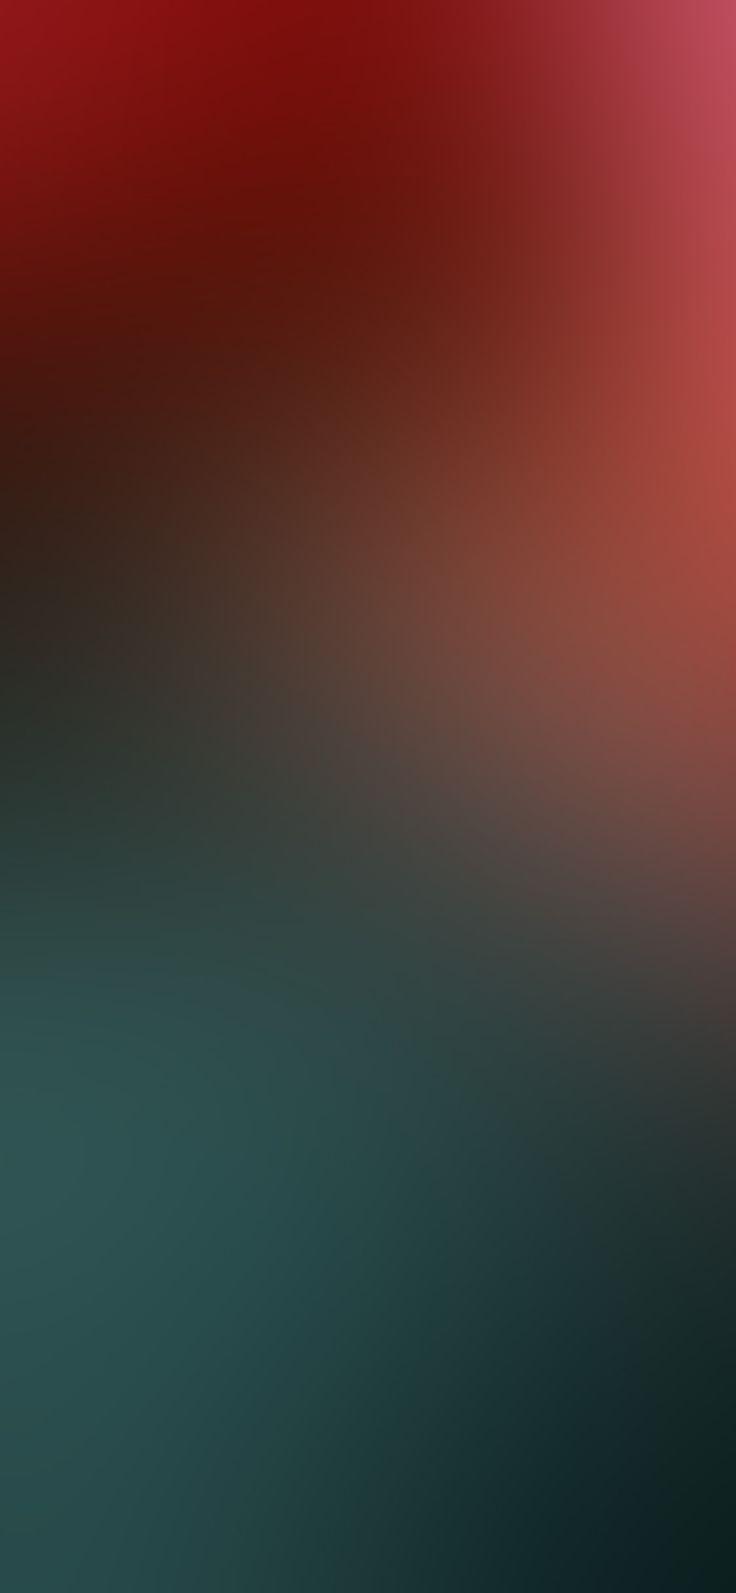 Iphone X Wallpapers Full Hd